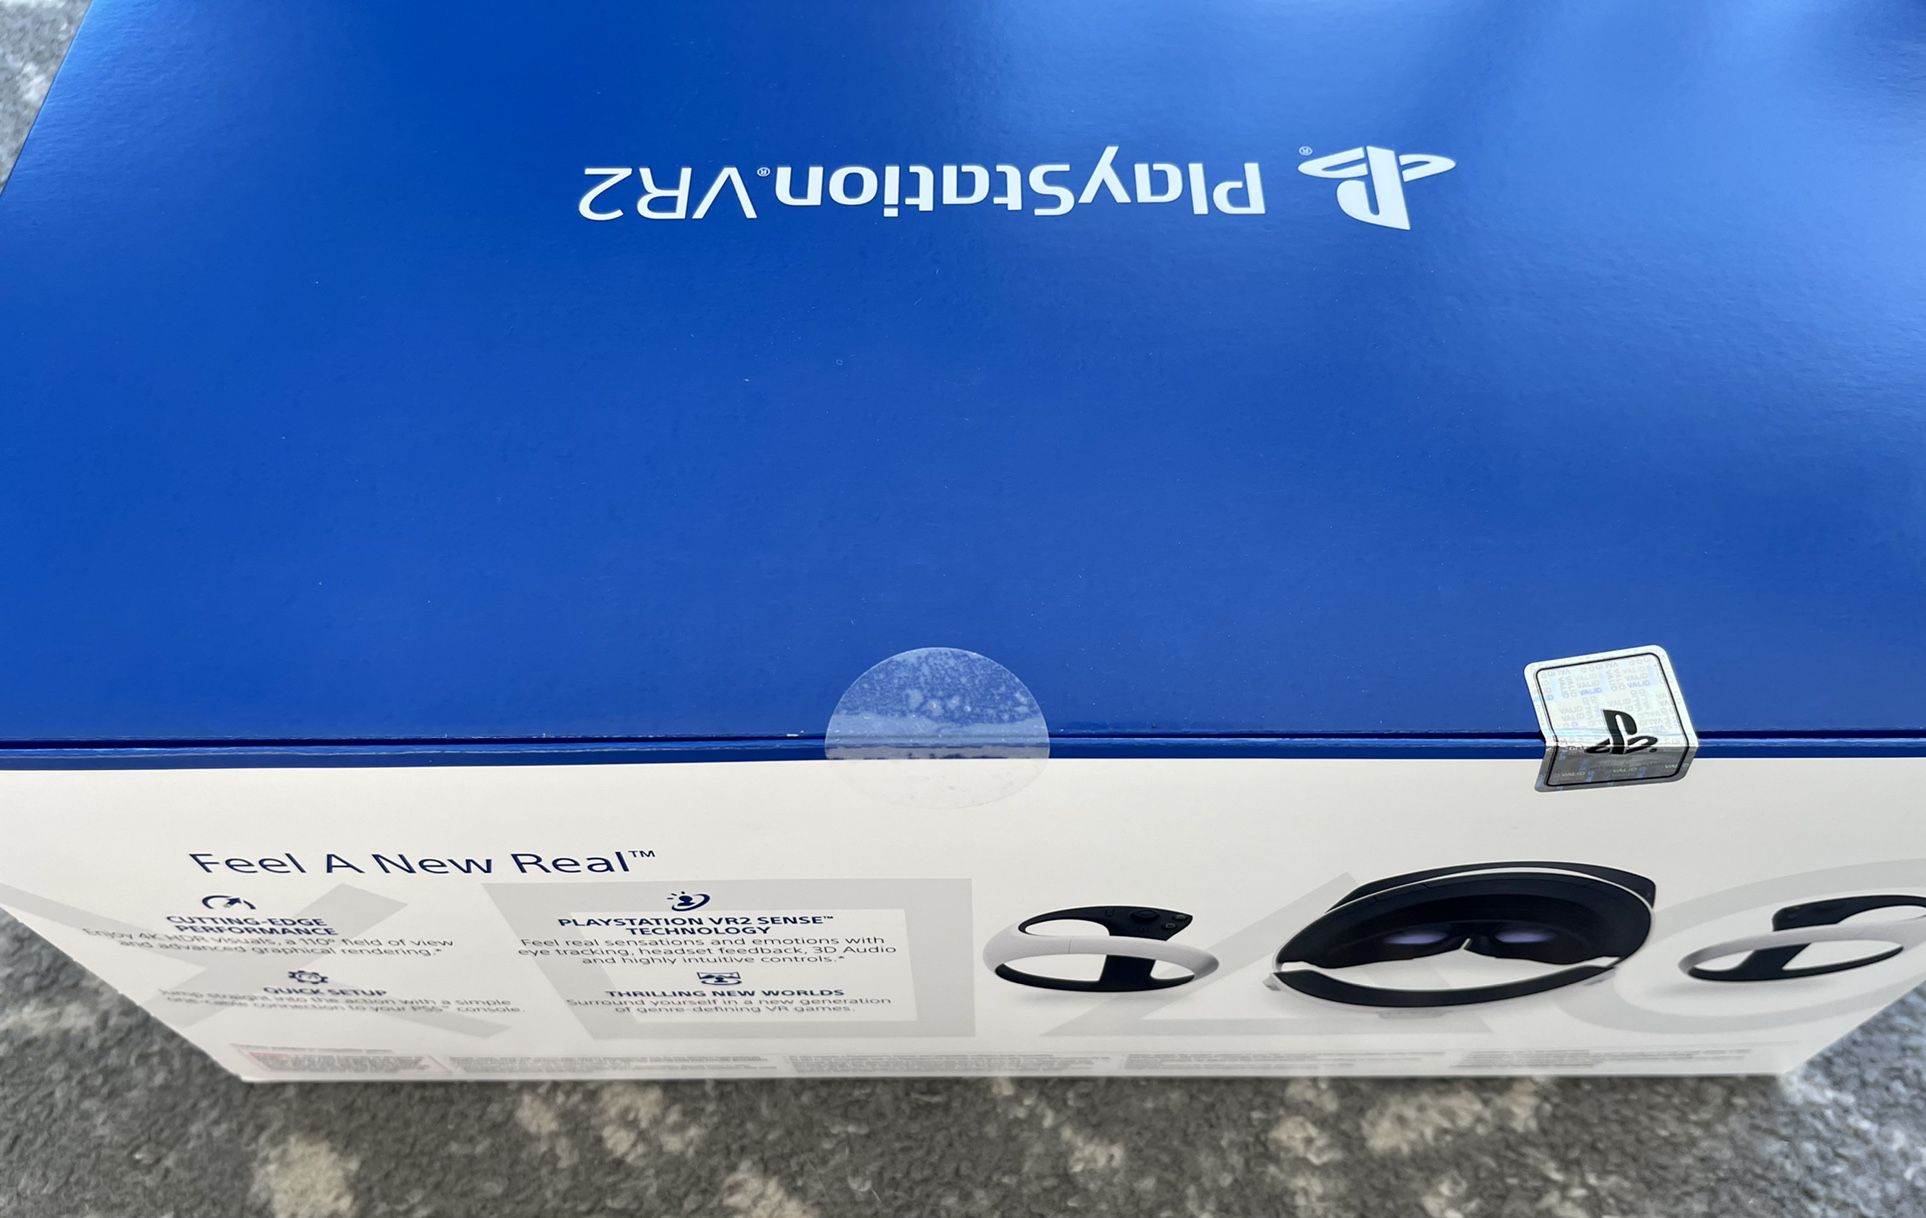 Playstation VR 2 PSVR 2 for Sale in Tumwater, WA - OfferUp